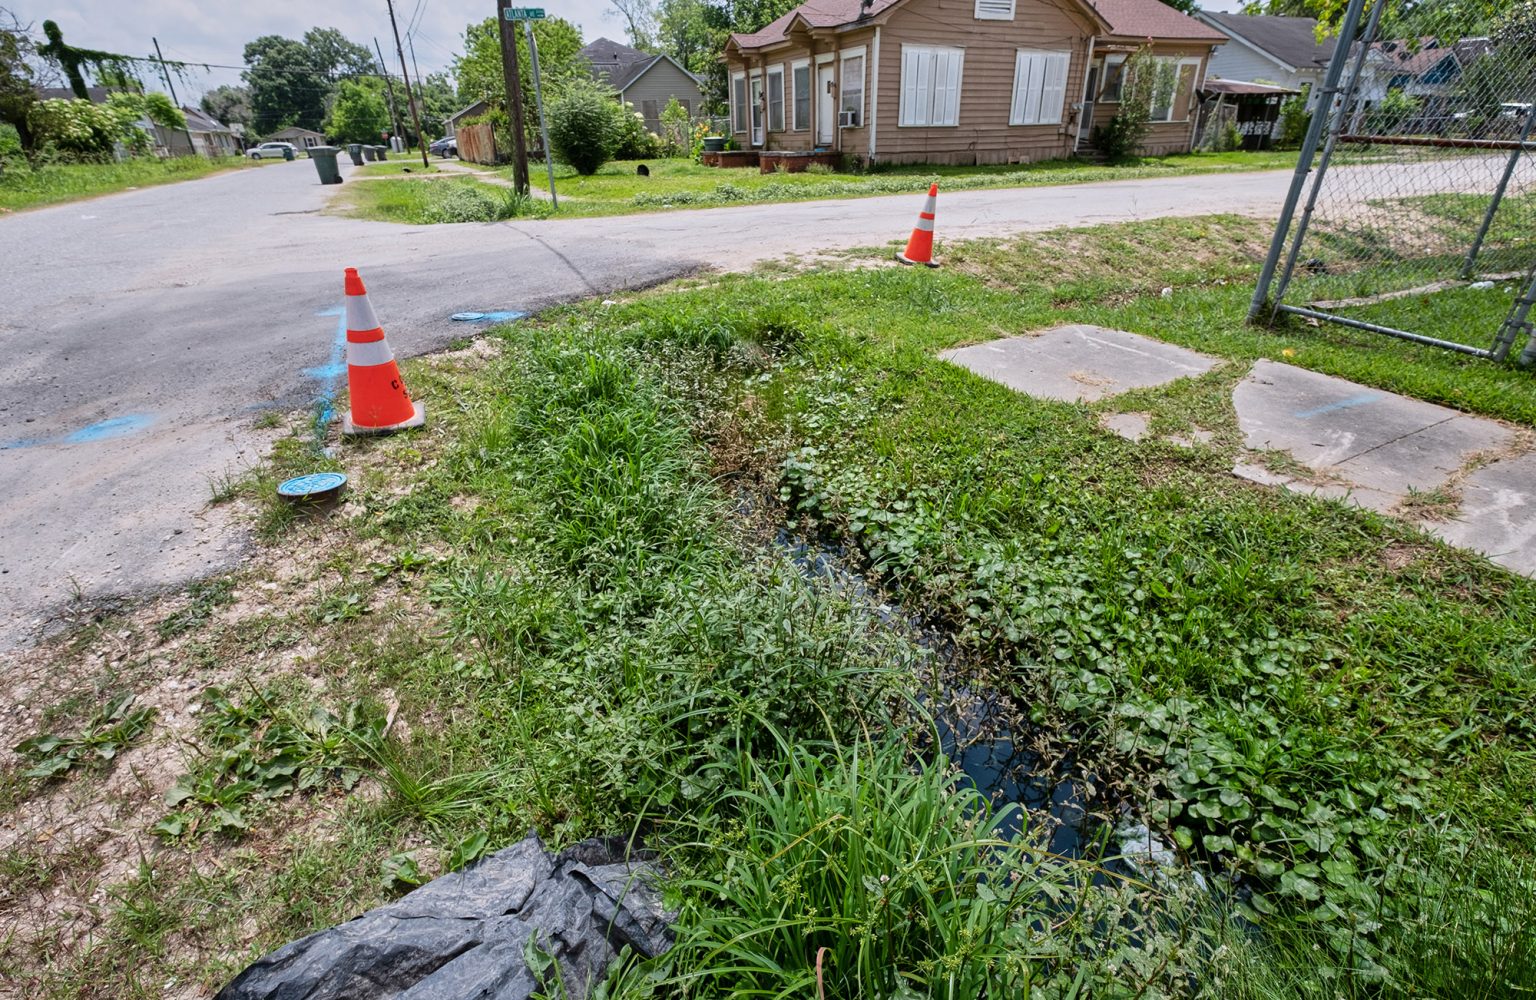 Safety cones mark an area of standing water and overgrown vegetation on Atlanta Avenue in a Beaumont, Texas neighborhood May 17, 2022. Throughout the year, and especially during hurricane season, Beaumont residents face environmental hardships like flooding, sewage overflow, foul smells, air pollution from nearby oil refineries and a lack of recovery funding.